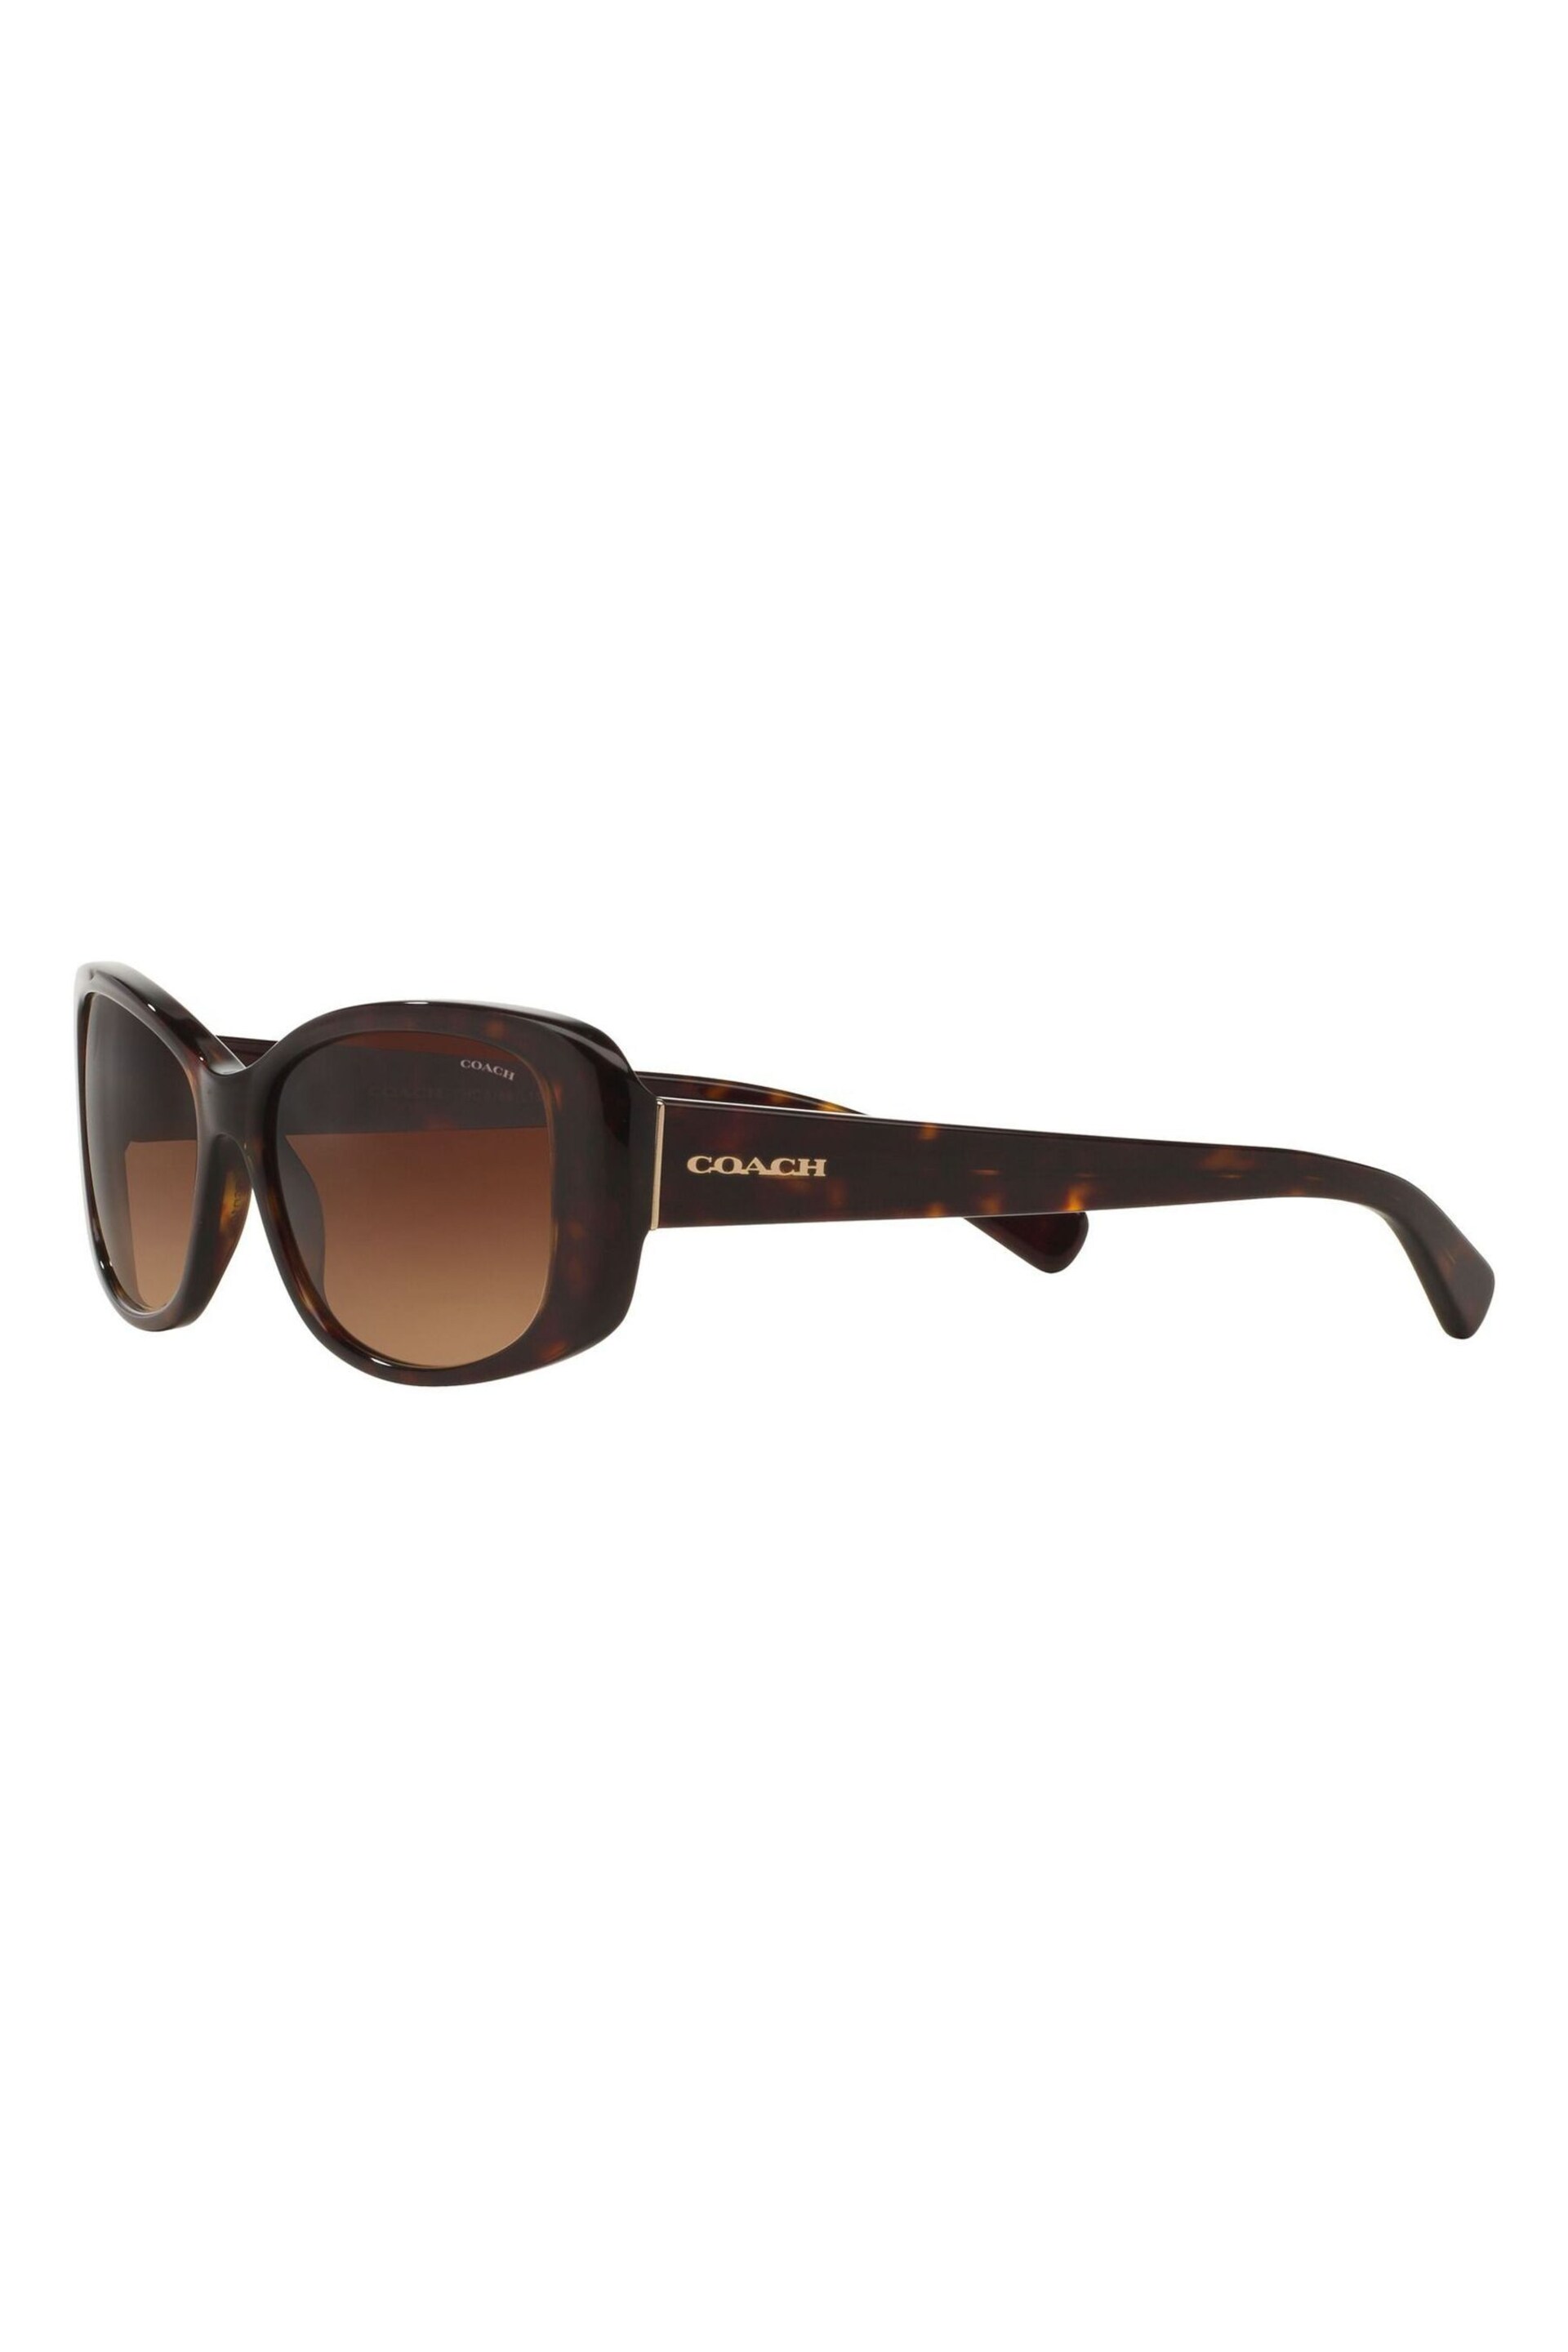 Coach Brown L156 Oval Sunglasses - Image 13 of 13